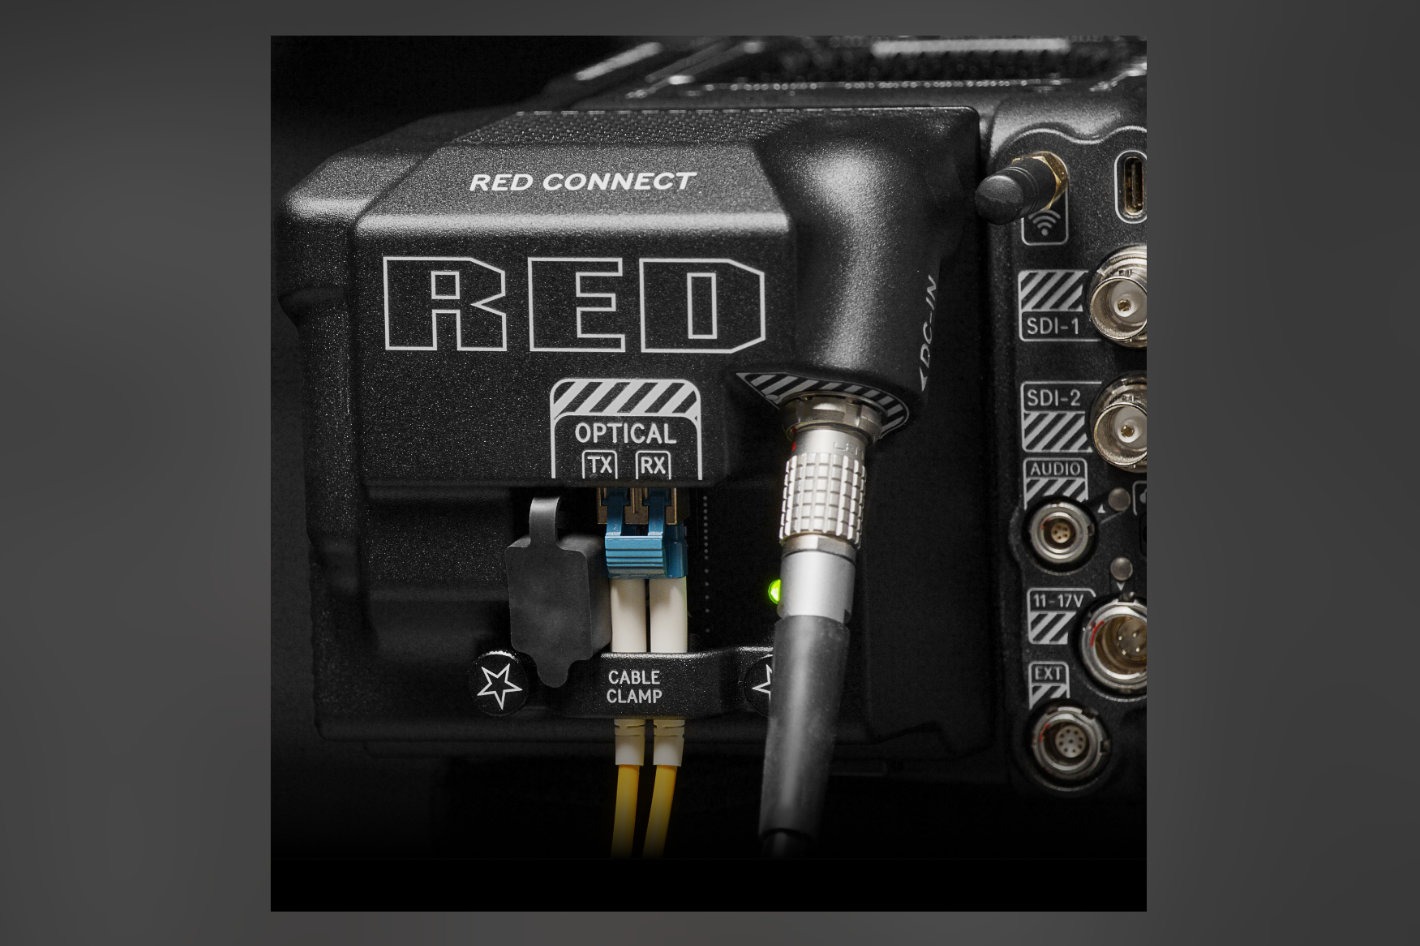 RED Connect with SMPTE ST 2110-22 JPEG-XS debuts at IBC2023